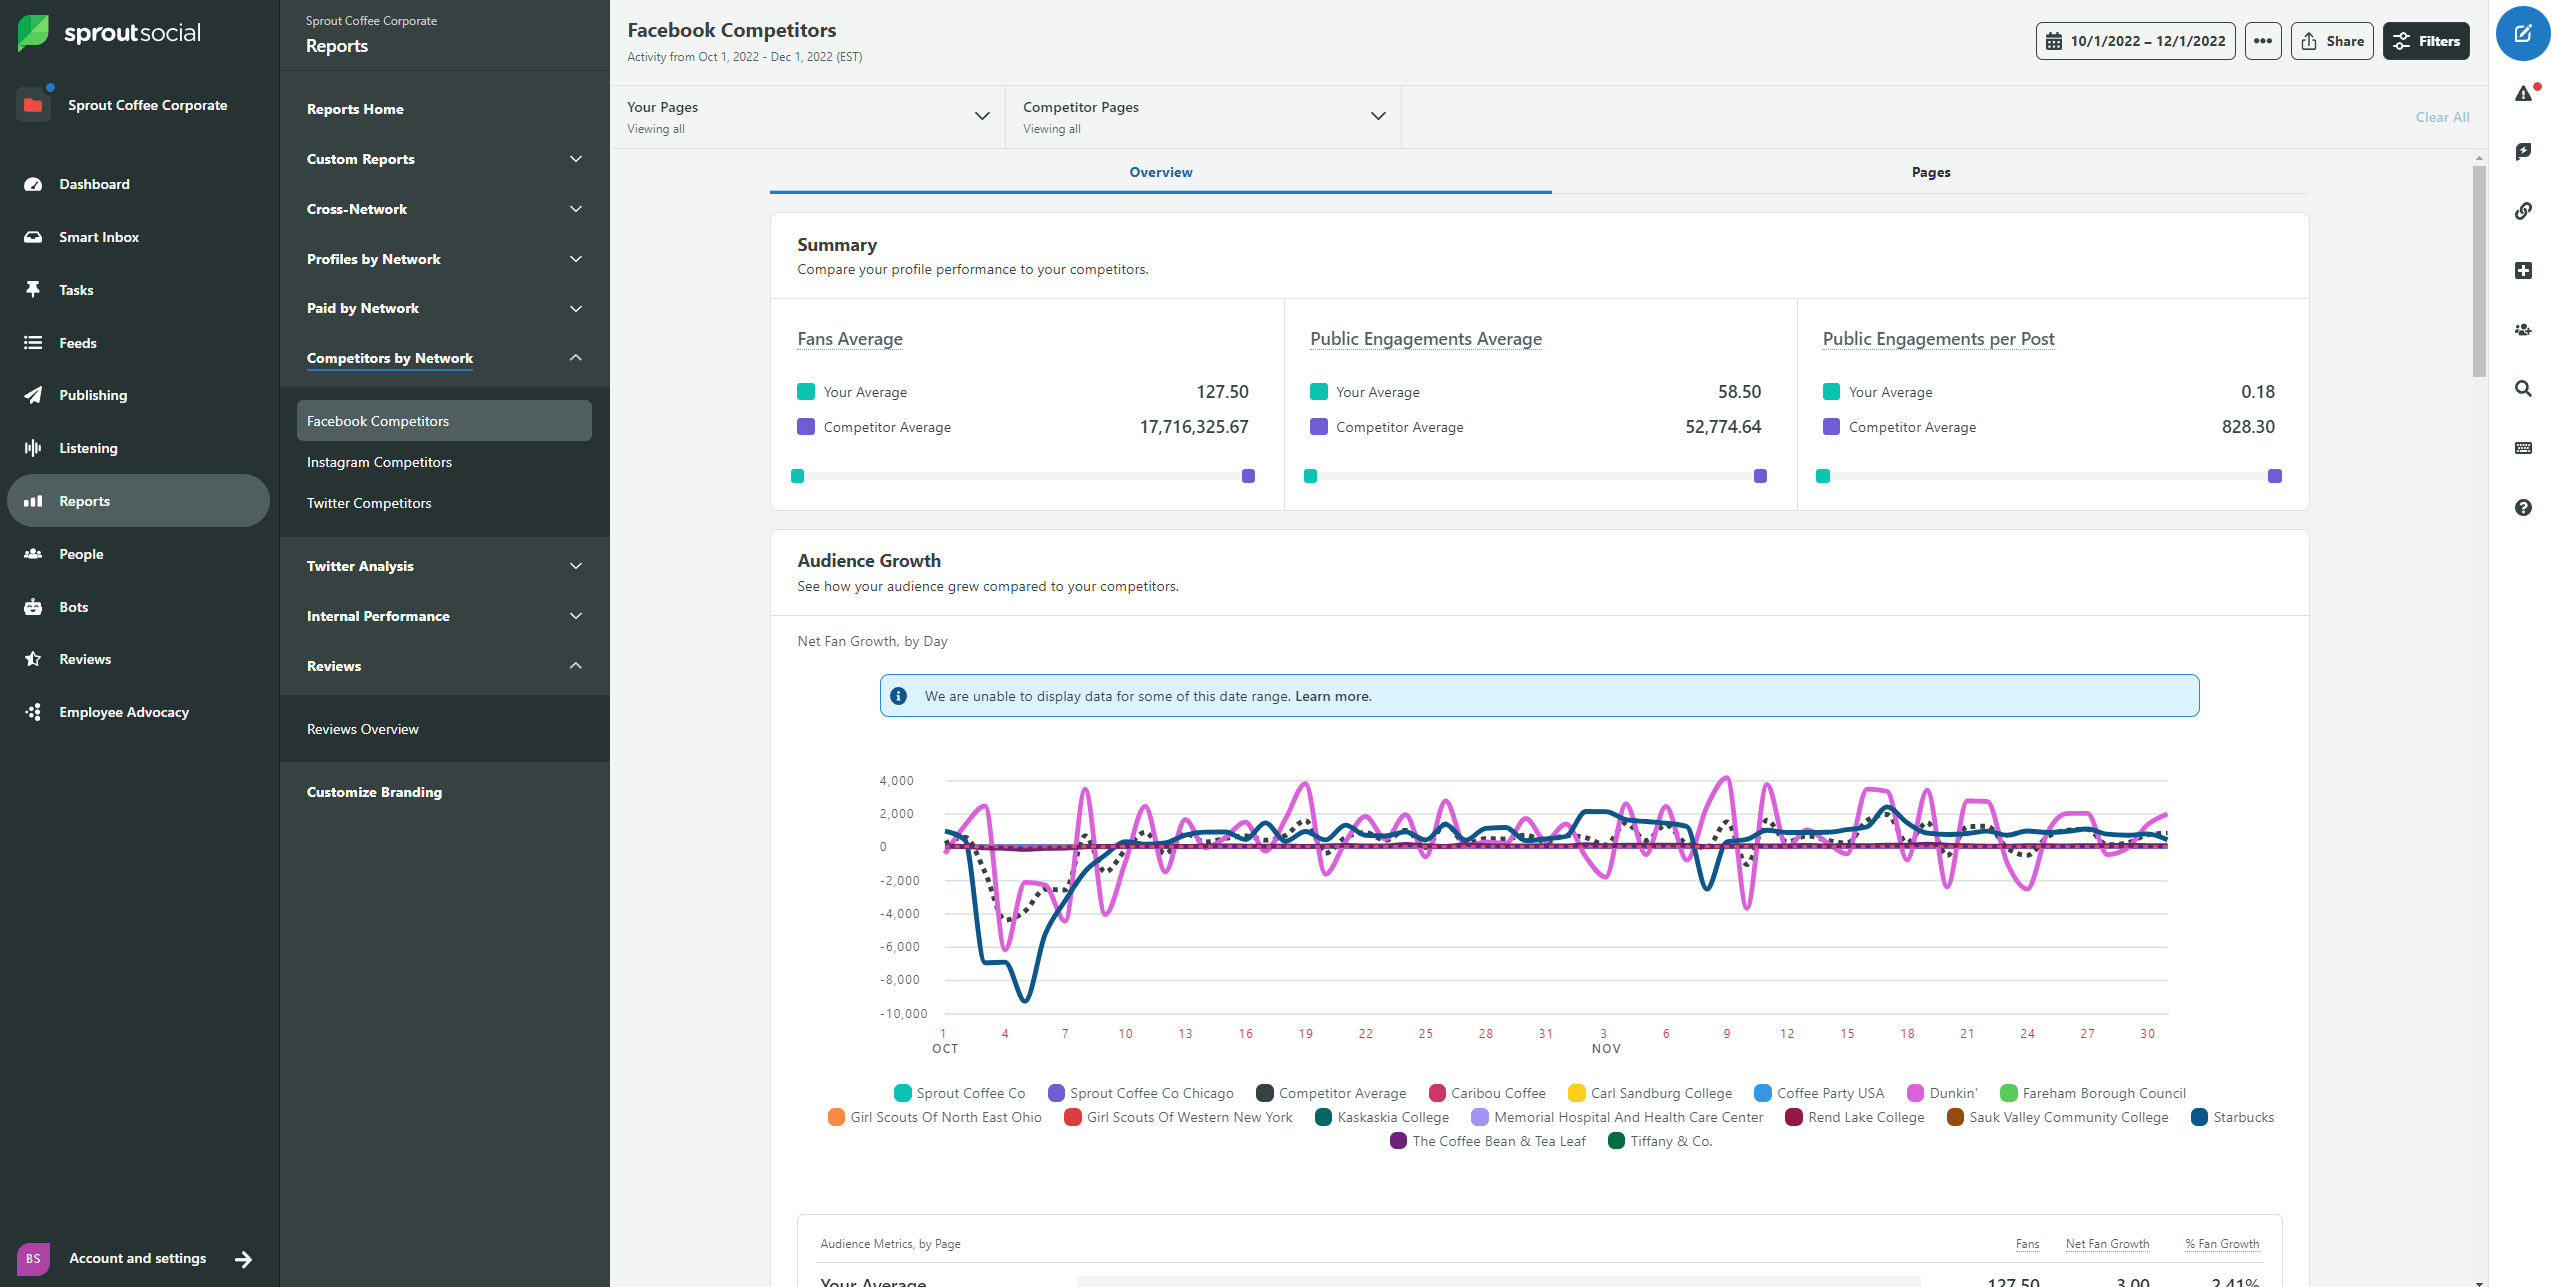 A Facebook Competitors report within Sprout. The dashboard features a summary comparing profile performance to competitors and an audience growth chart. The chart shows net fan growth by day per competitor. 